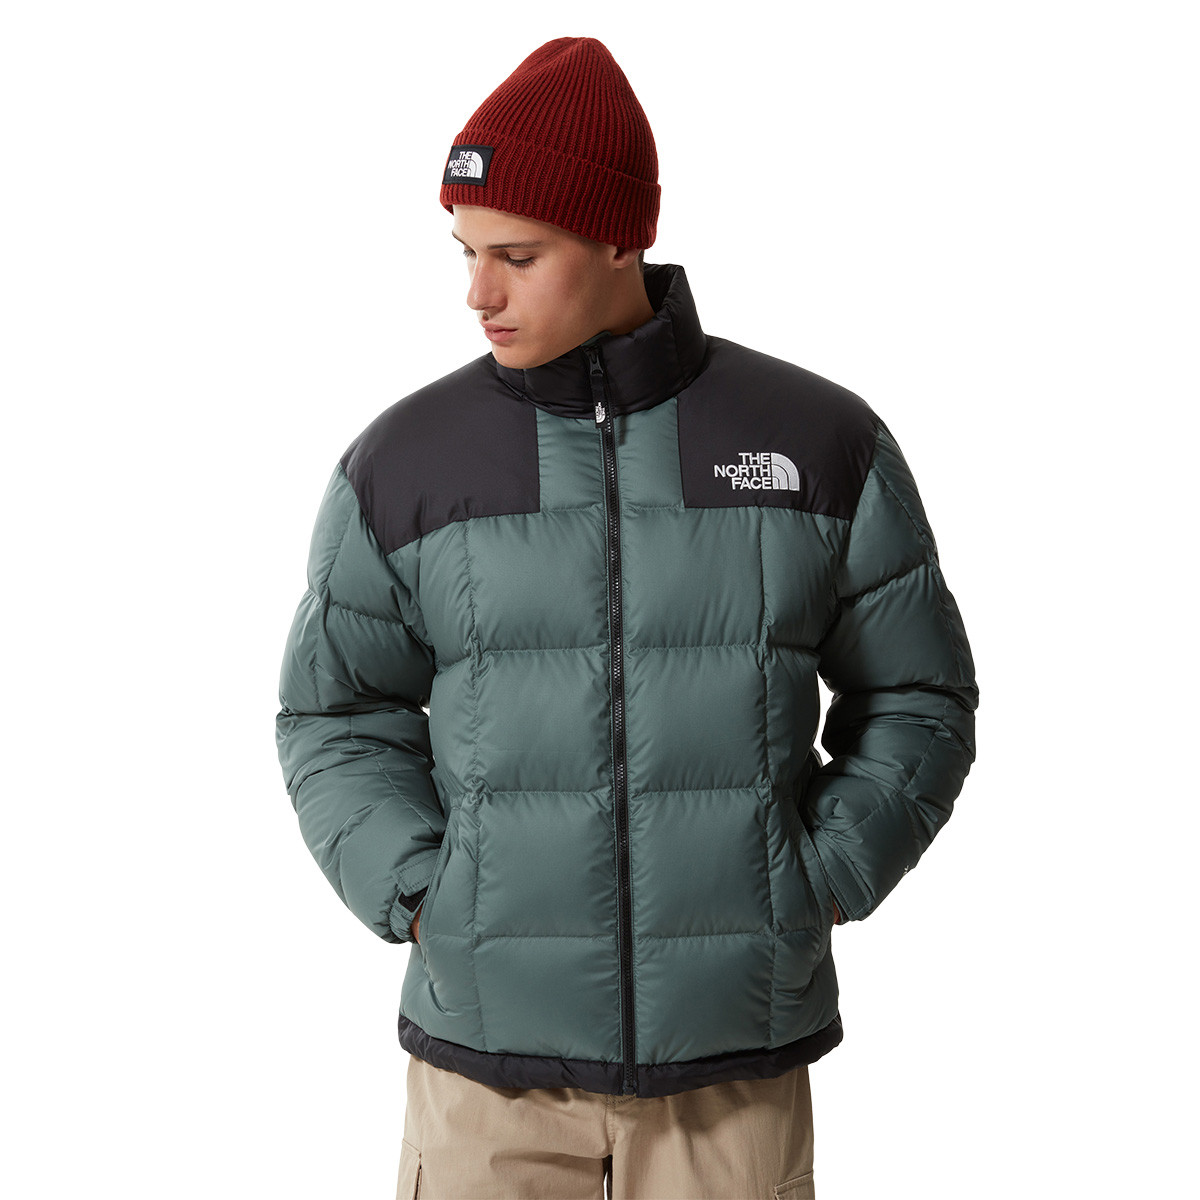 The North Face Lhotse Jacket Balsam Green | The North Face Jacket